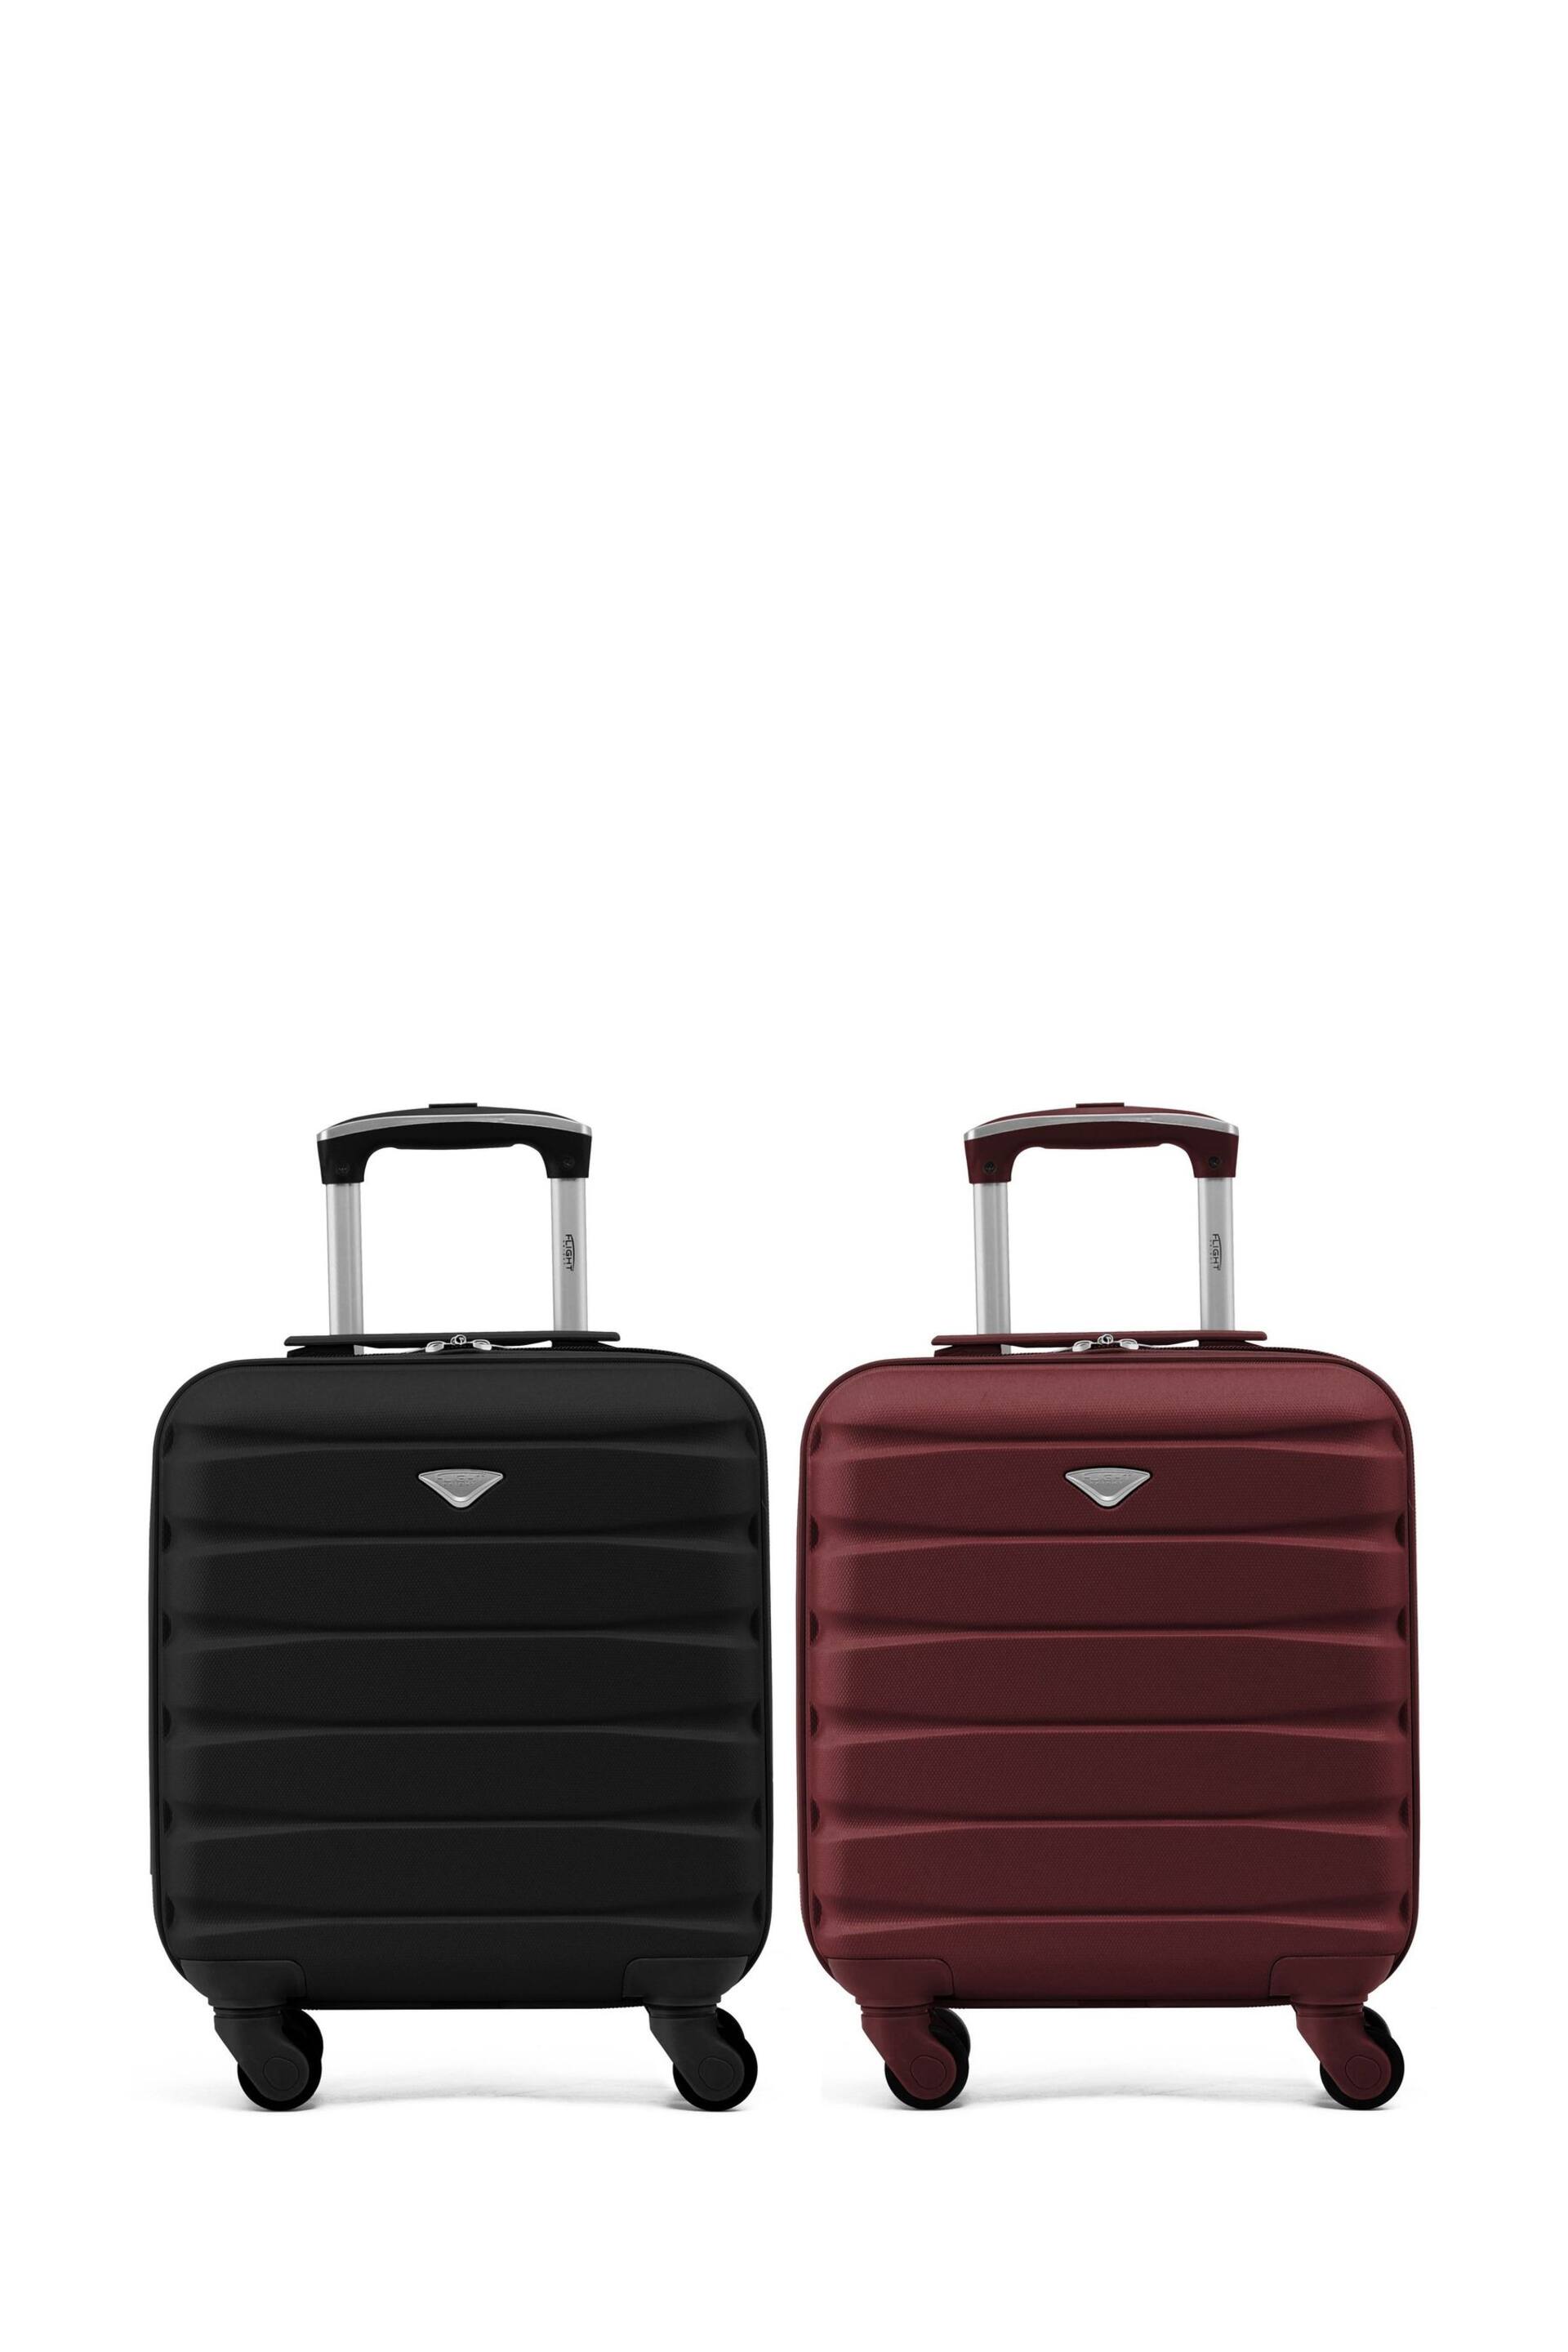 Flight Knight EasyJet Underseat 45x36x20cm 4 Wheel ABS Hard Case Cabin Carry On Suitcase Set Of 2 - Image 1 of 2